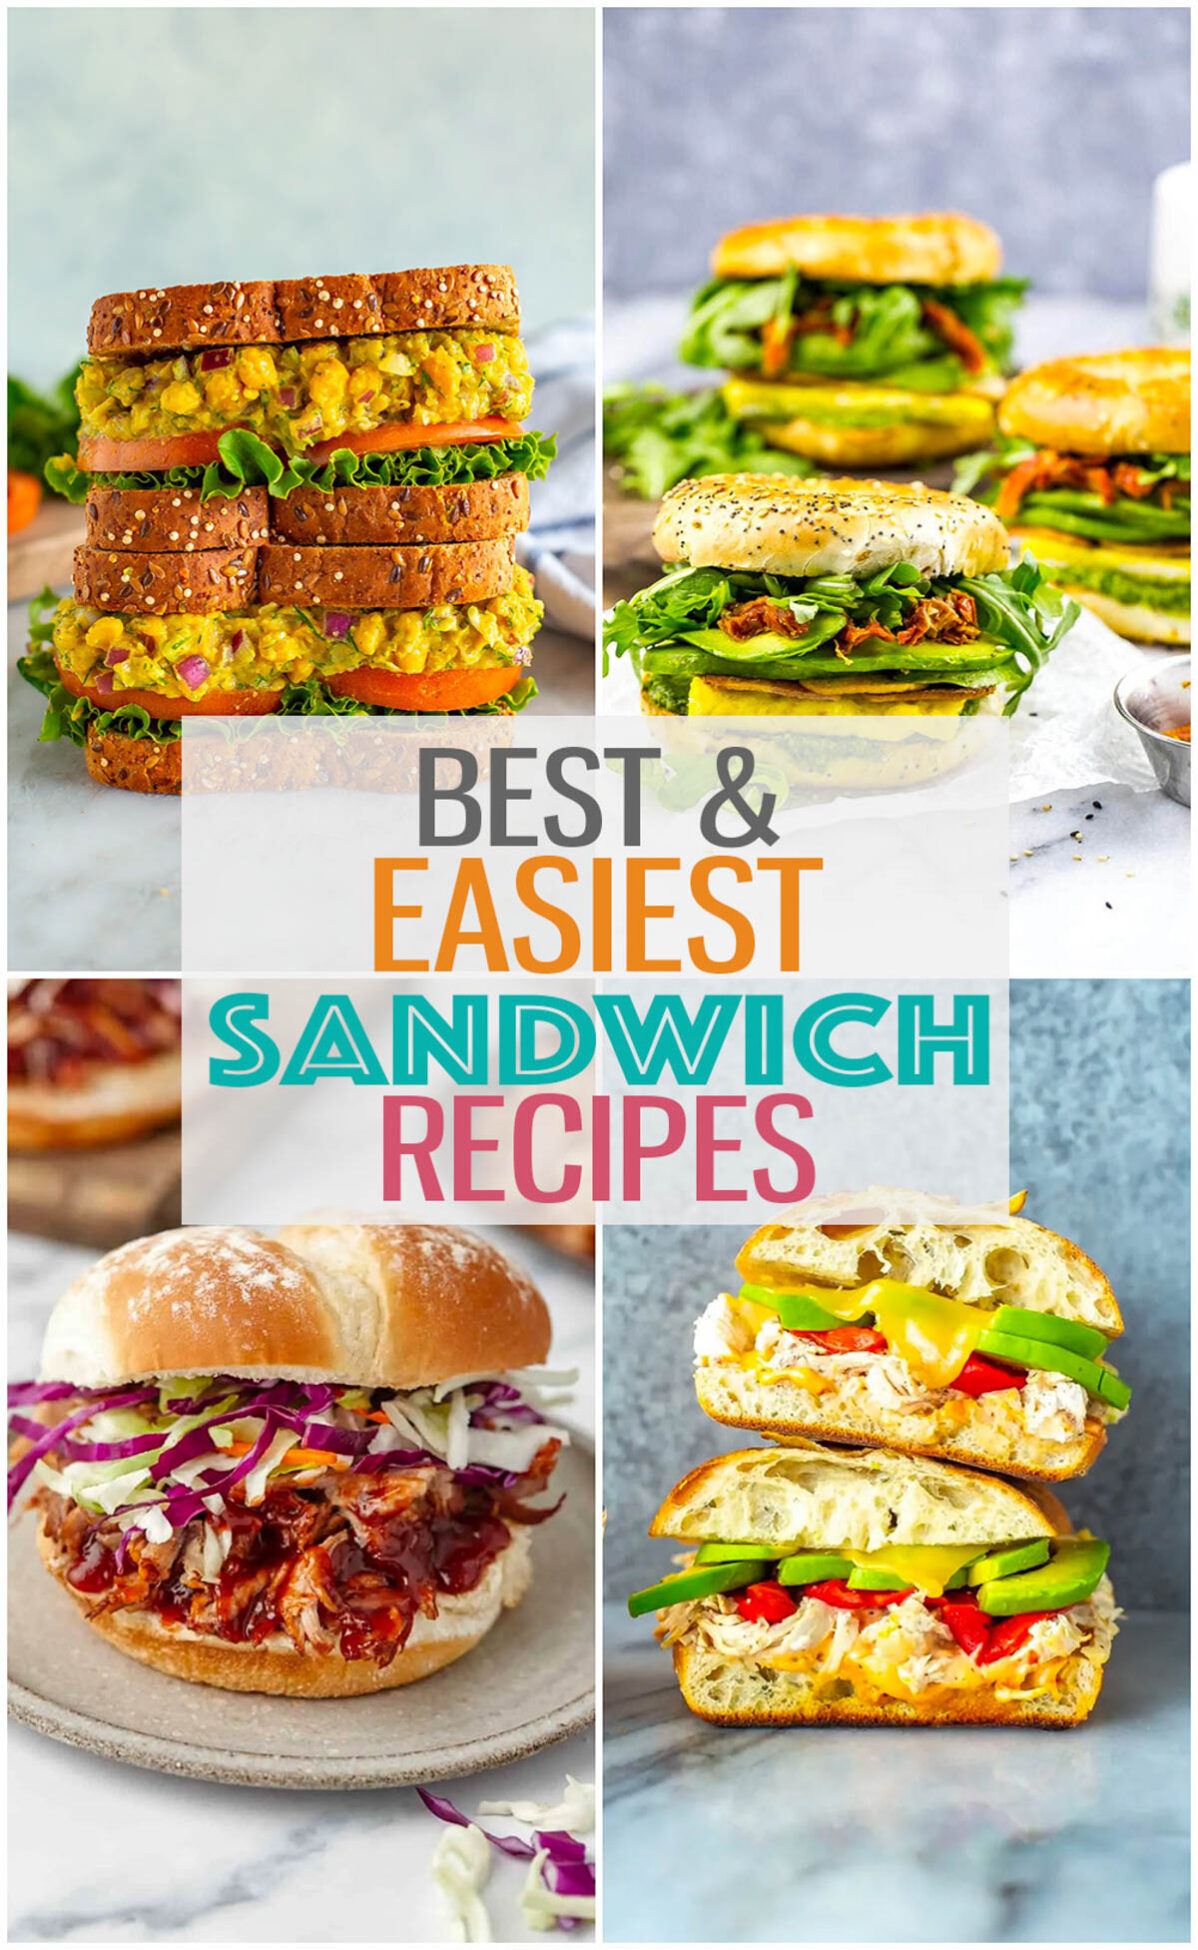 A collage of 4 different sandwich recipes with the text "Easiest Best Sandwich Recipes" layered over top.